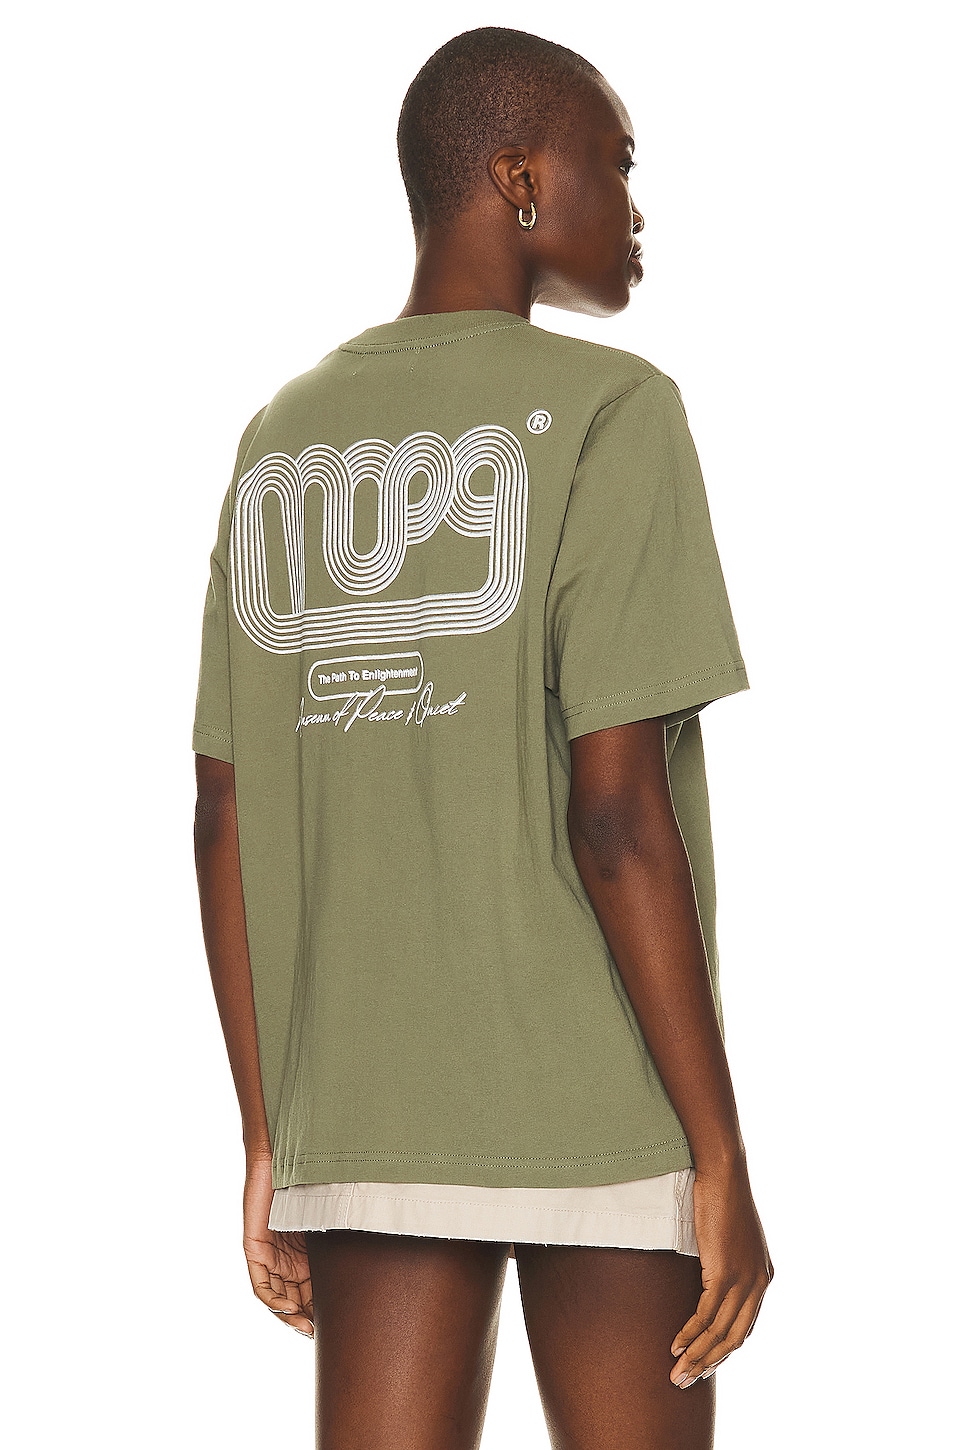 Path T-shirt in Olive